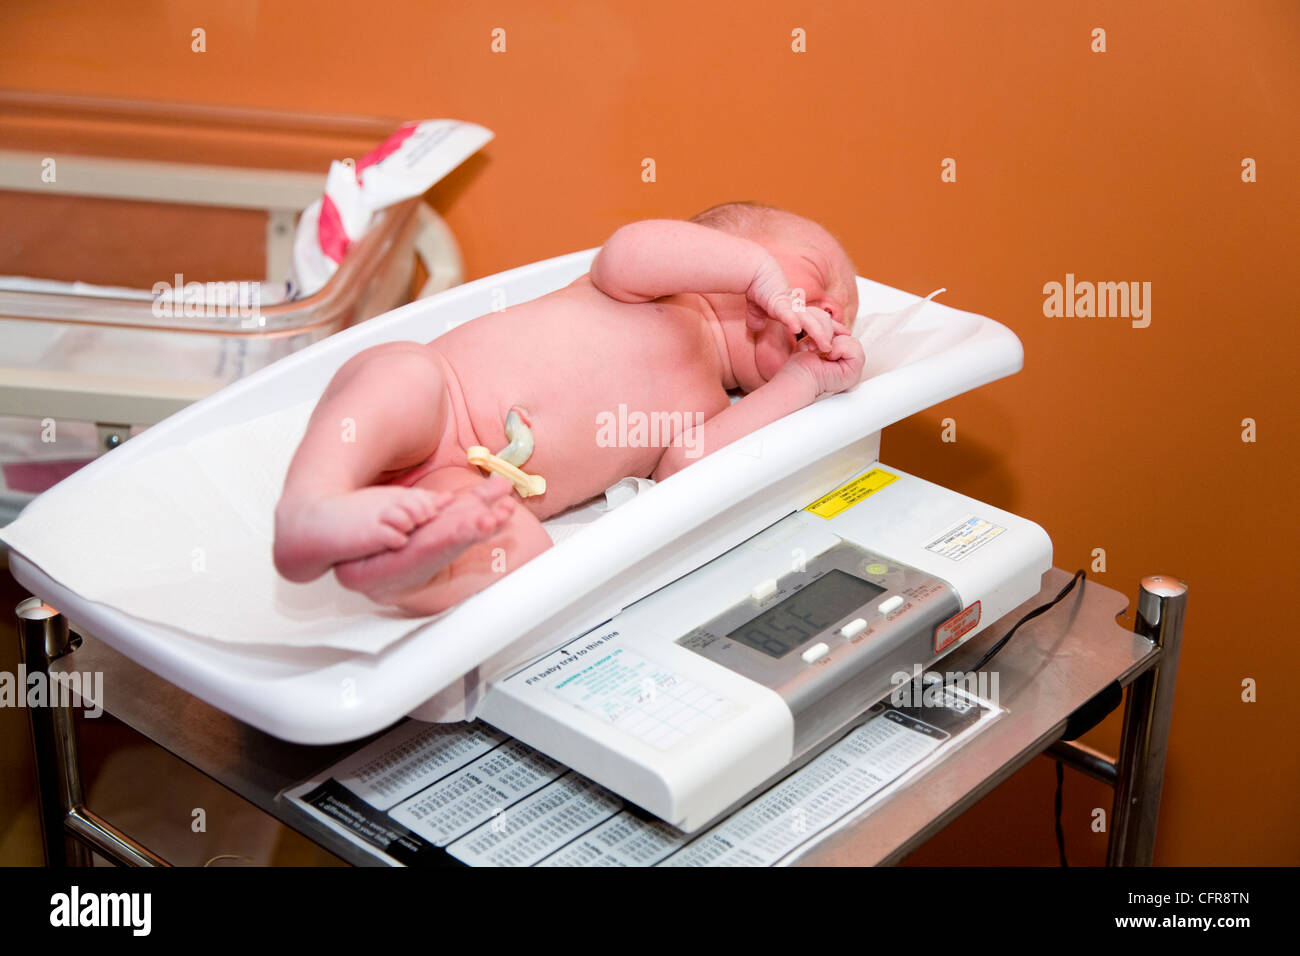 https://c8.alamy.com/comp/CFR8TN/weighing-a-newborn-new-born-baby-with-weighing-scales-scale-soon-after-CFR8TN.jpg